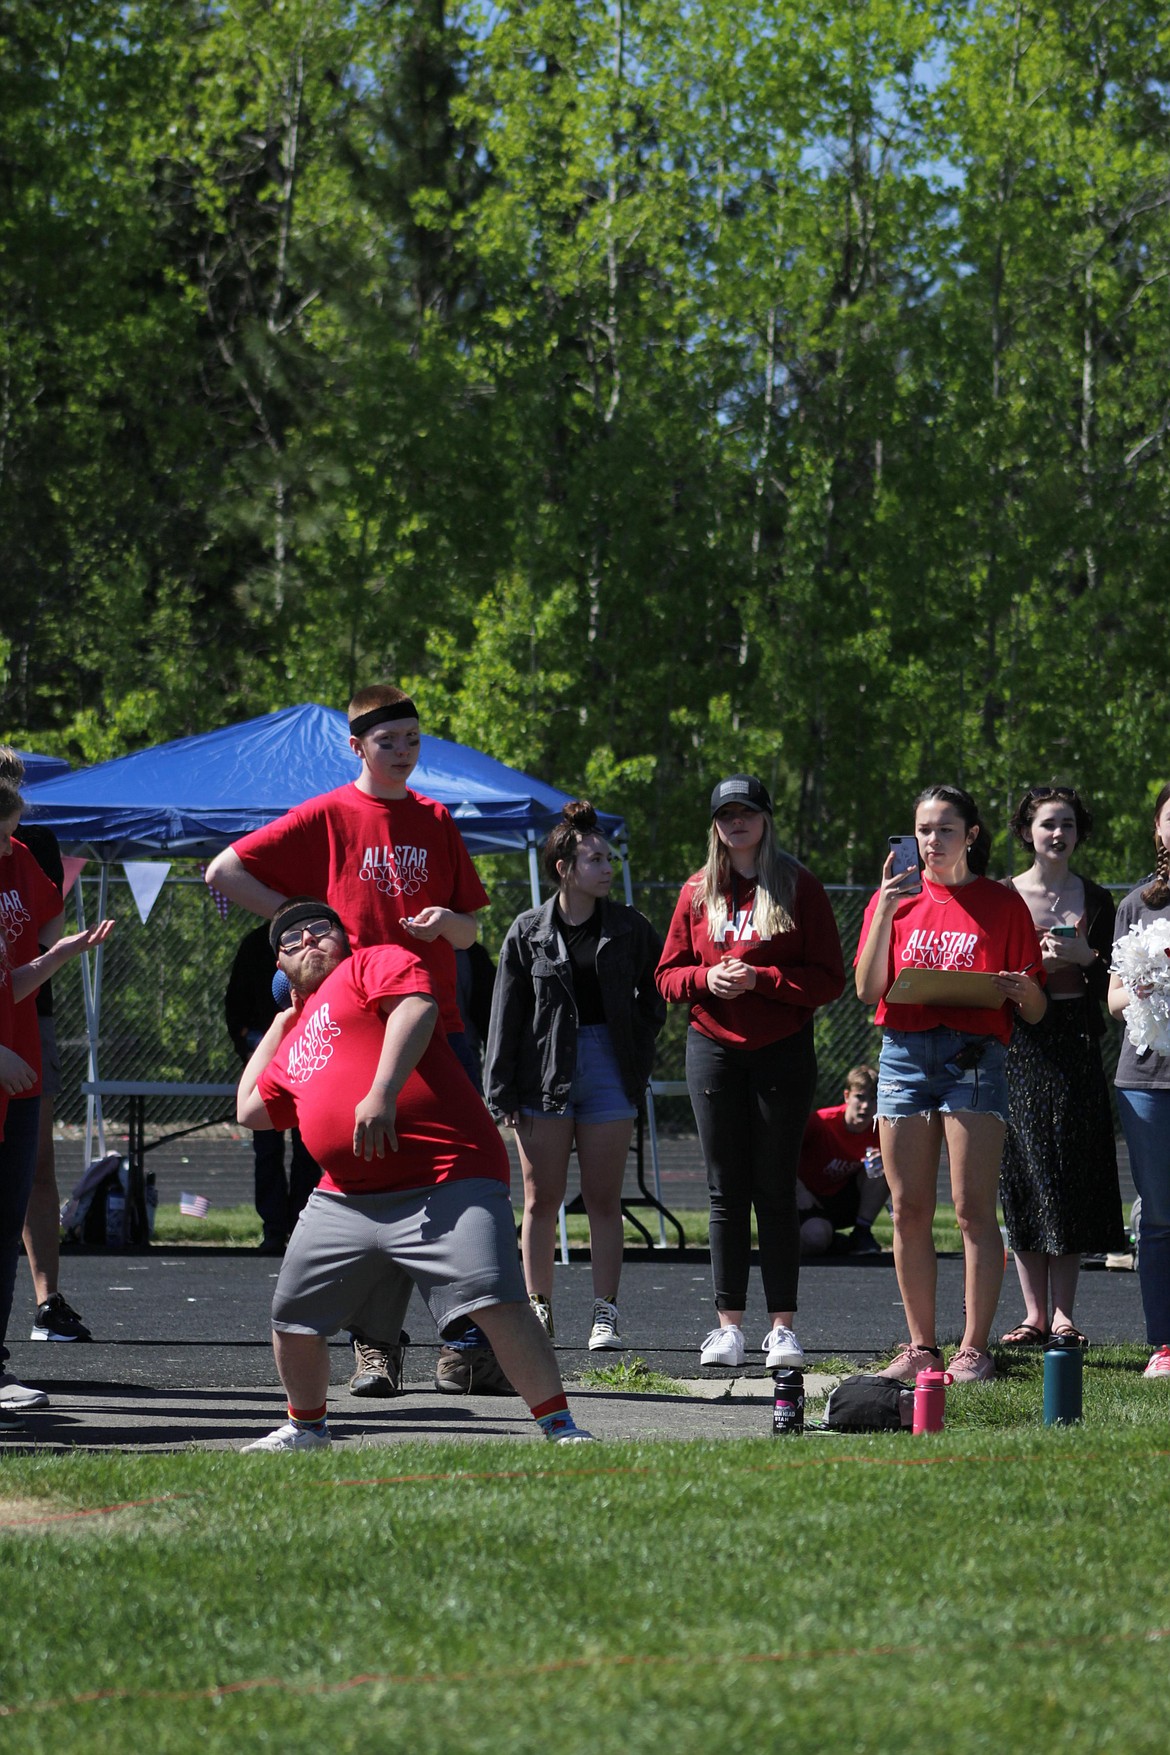 Kevin Collins throws during shot put.